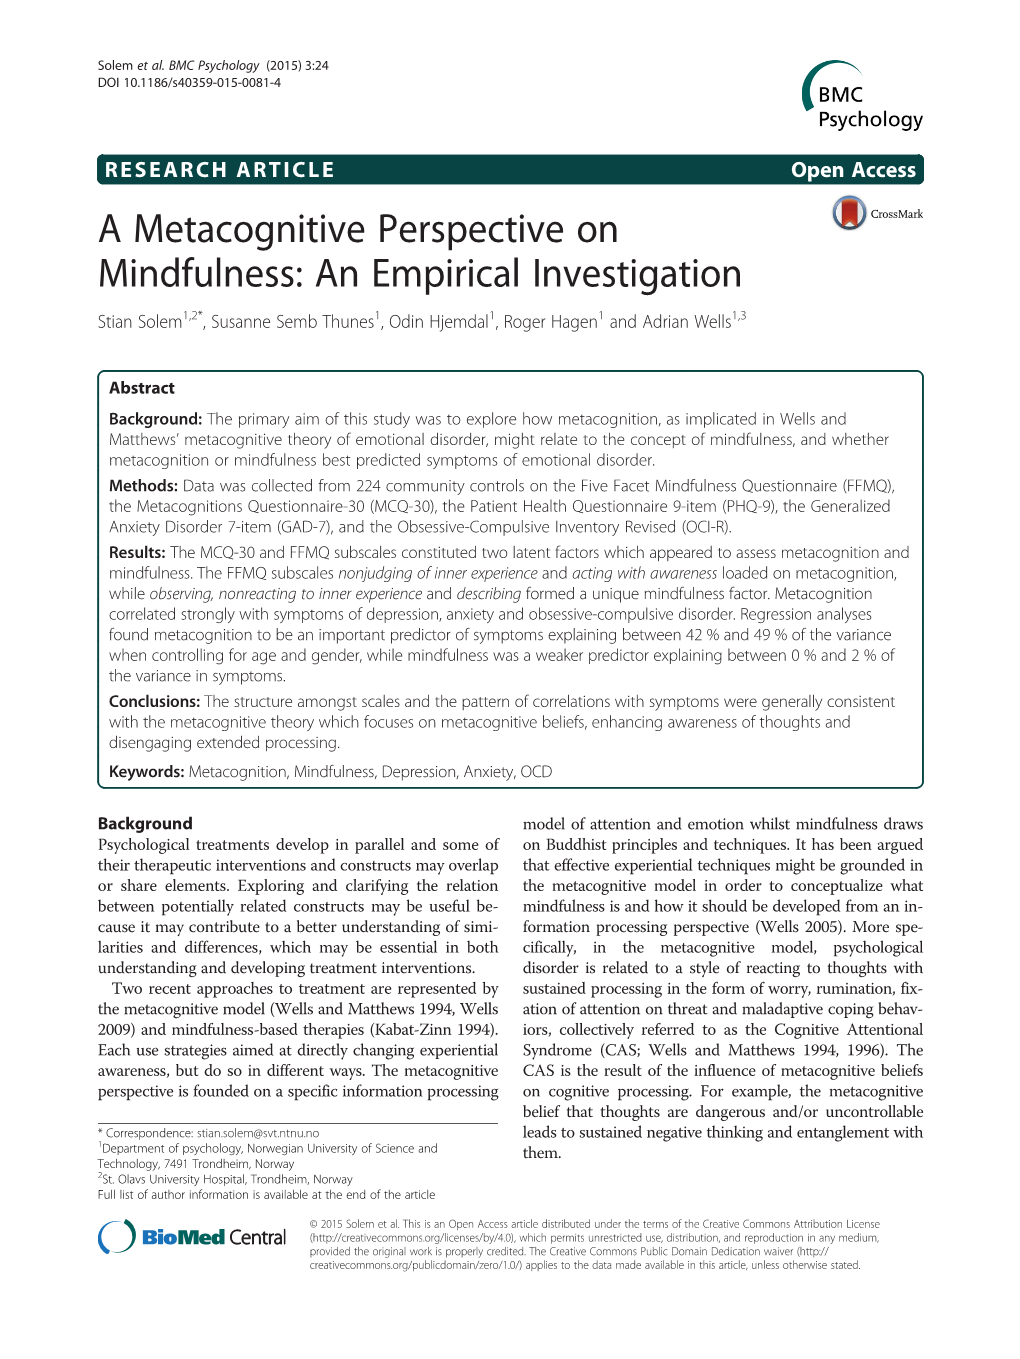 A Metacognitive Perspective on Mindfulness: an Empirical Investigation Stian Solem1,2*, Susanne Semb Thunes1, Odin Hjemdal1, Roger Hagen1 and Adrian Wells1,3